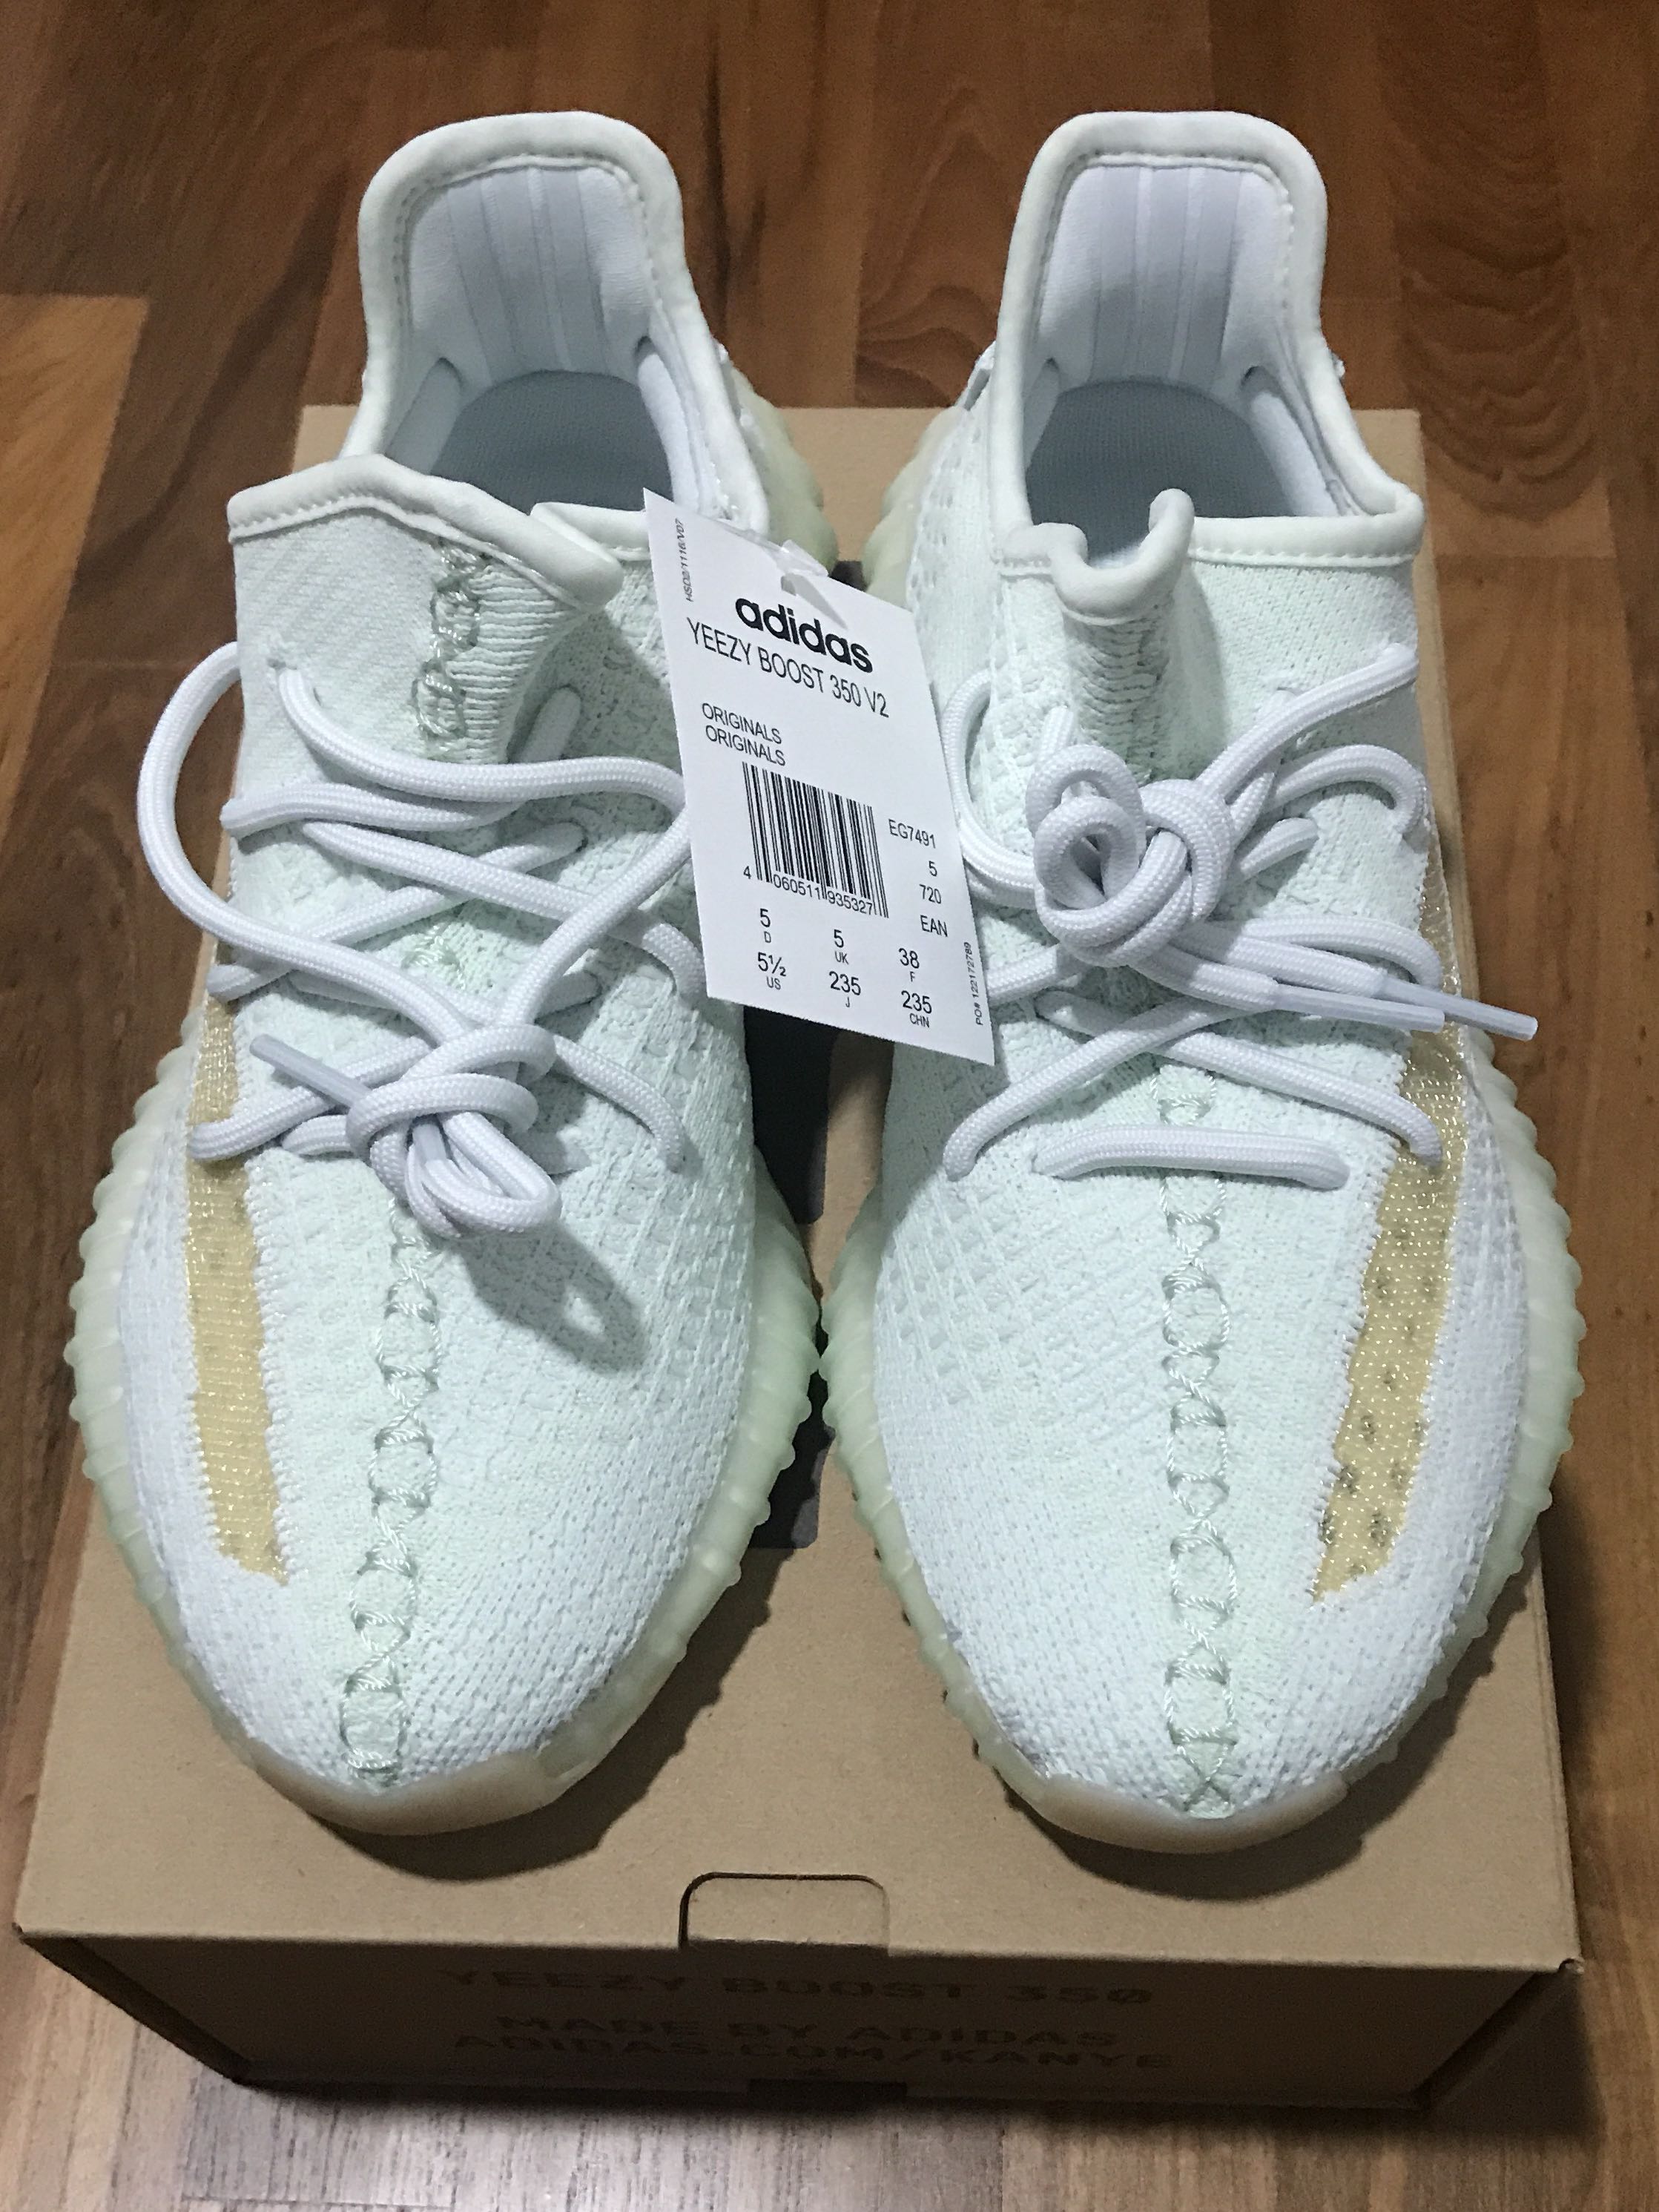 yeezy hyperspace resell